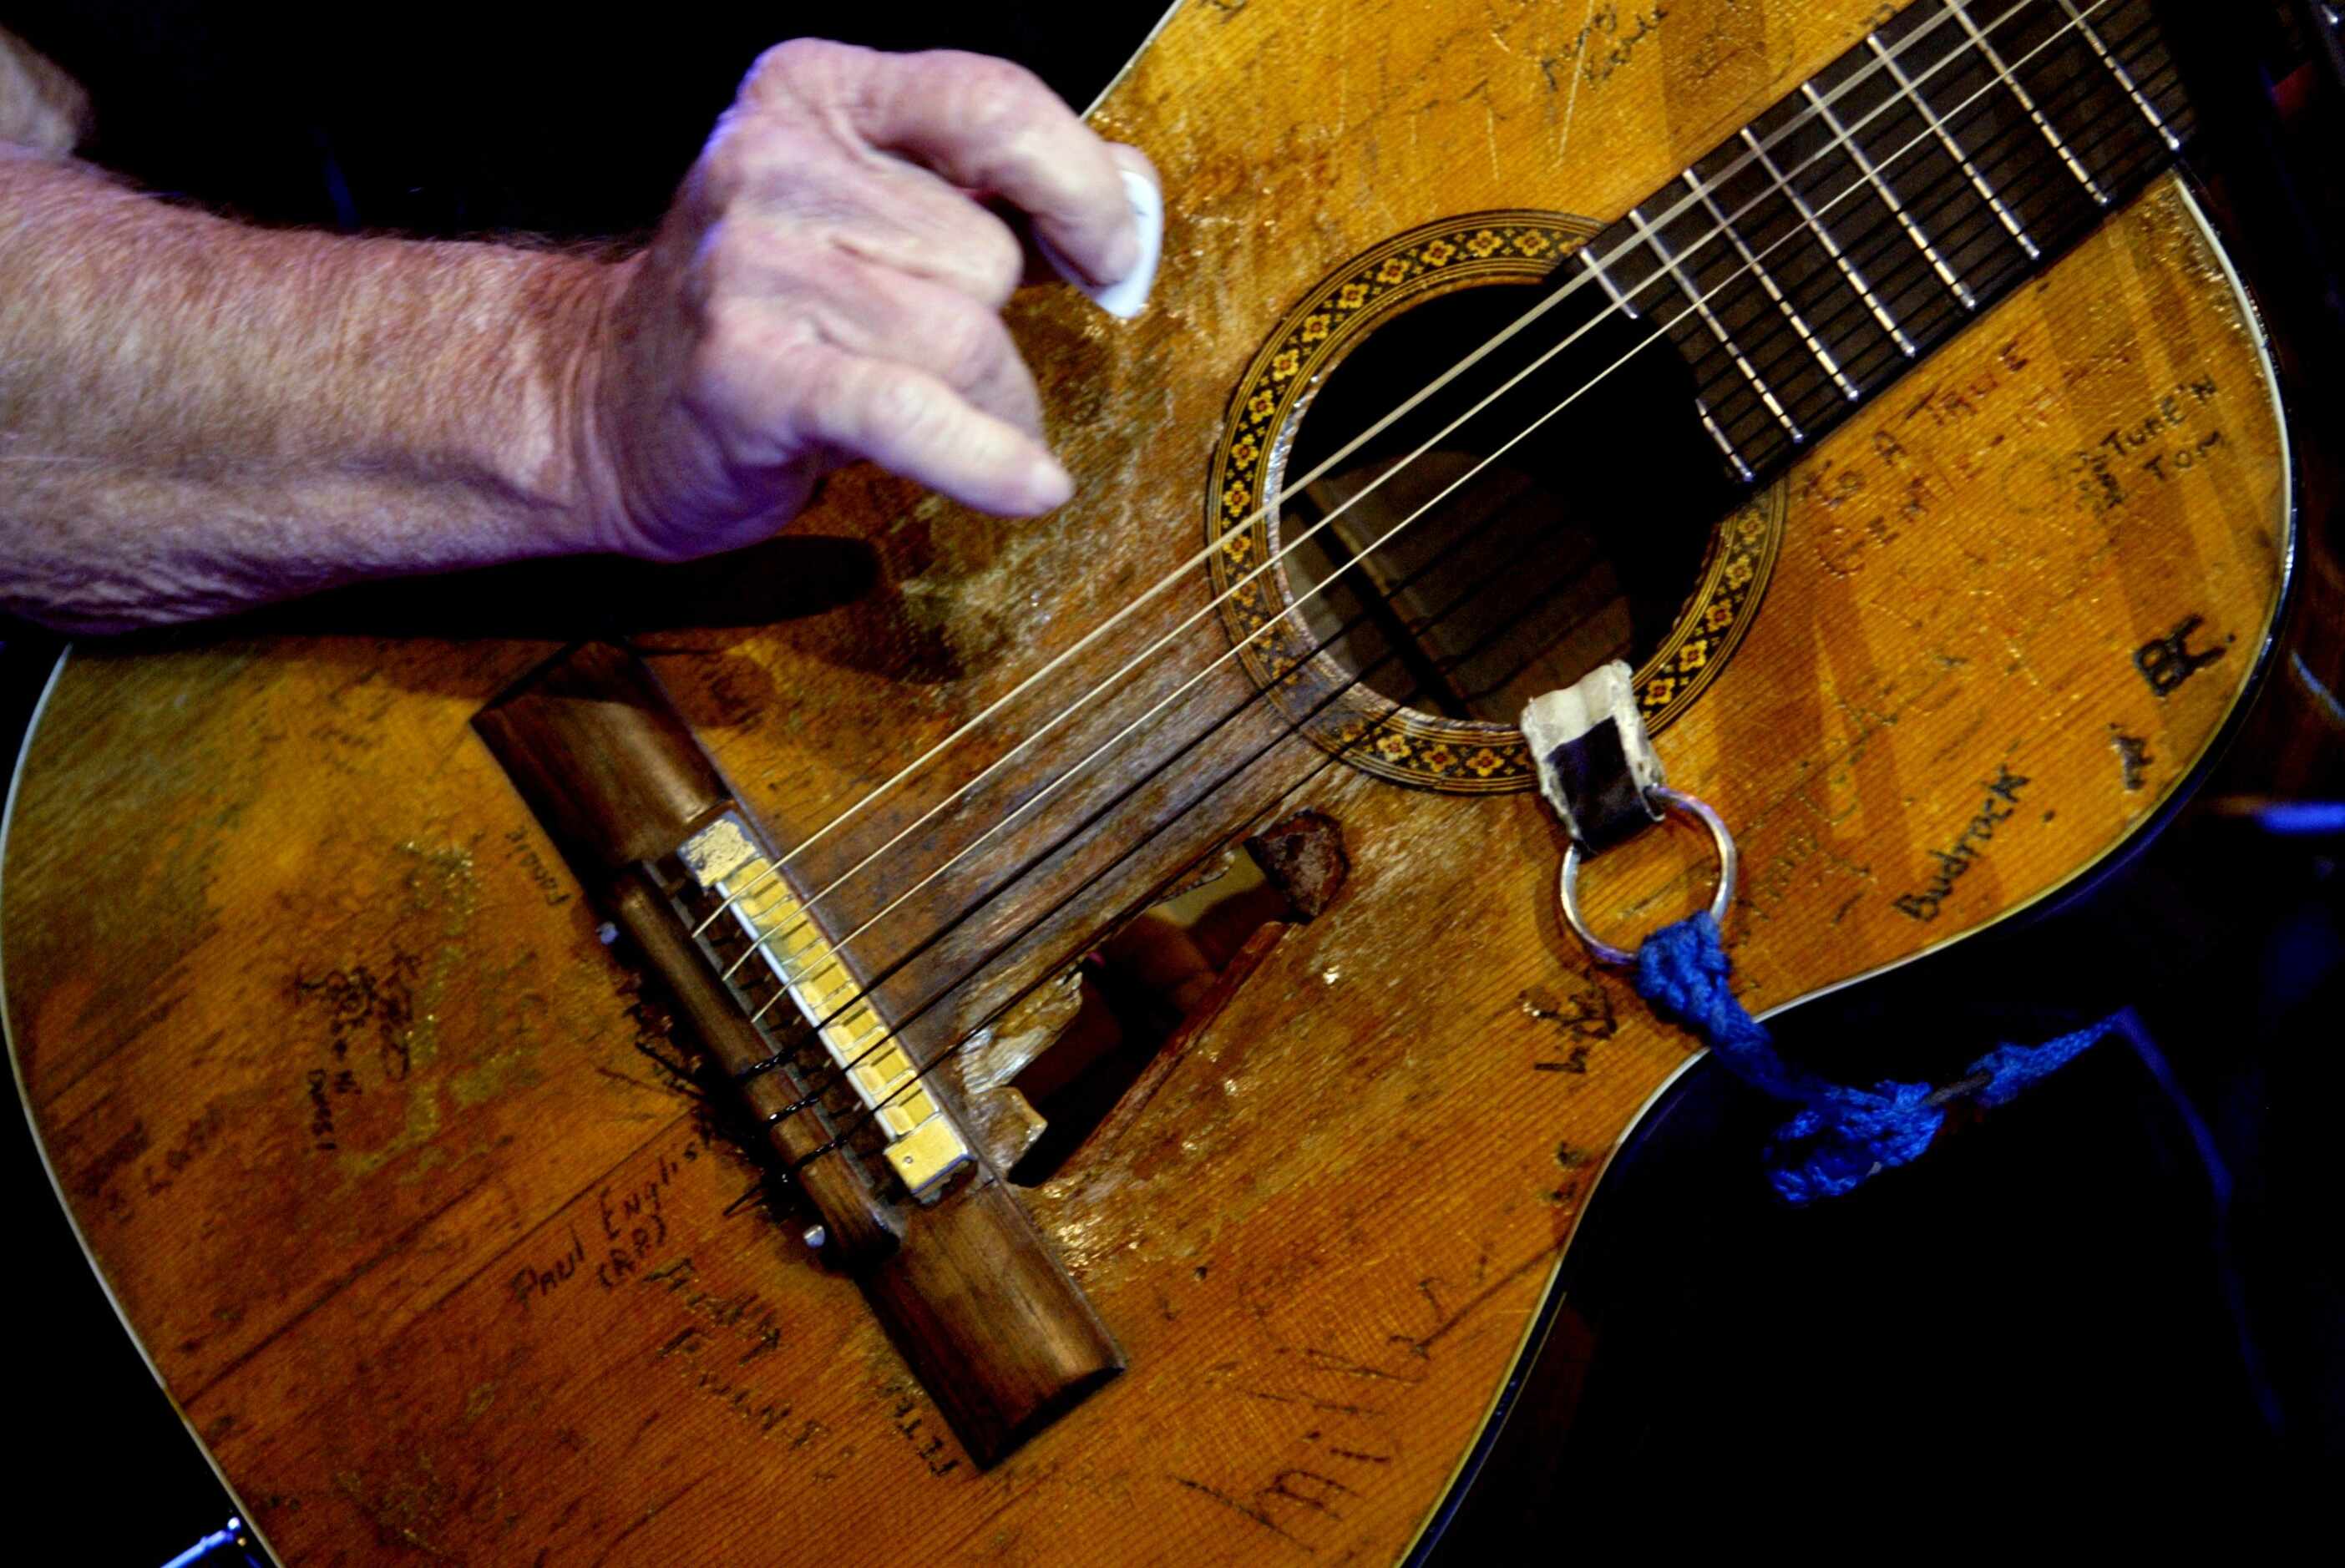 2003 - Willie Nelson's guitar "Trigger" as he performs at opening night of Lone Star Park in...